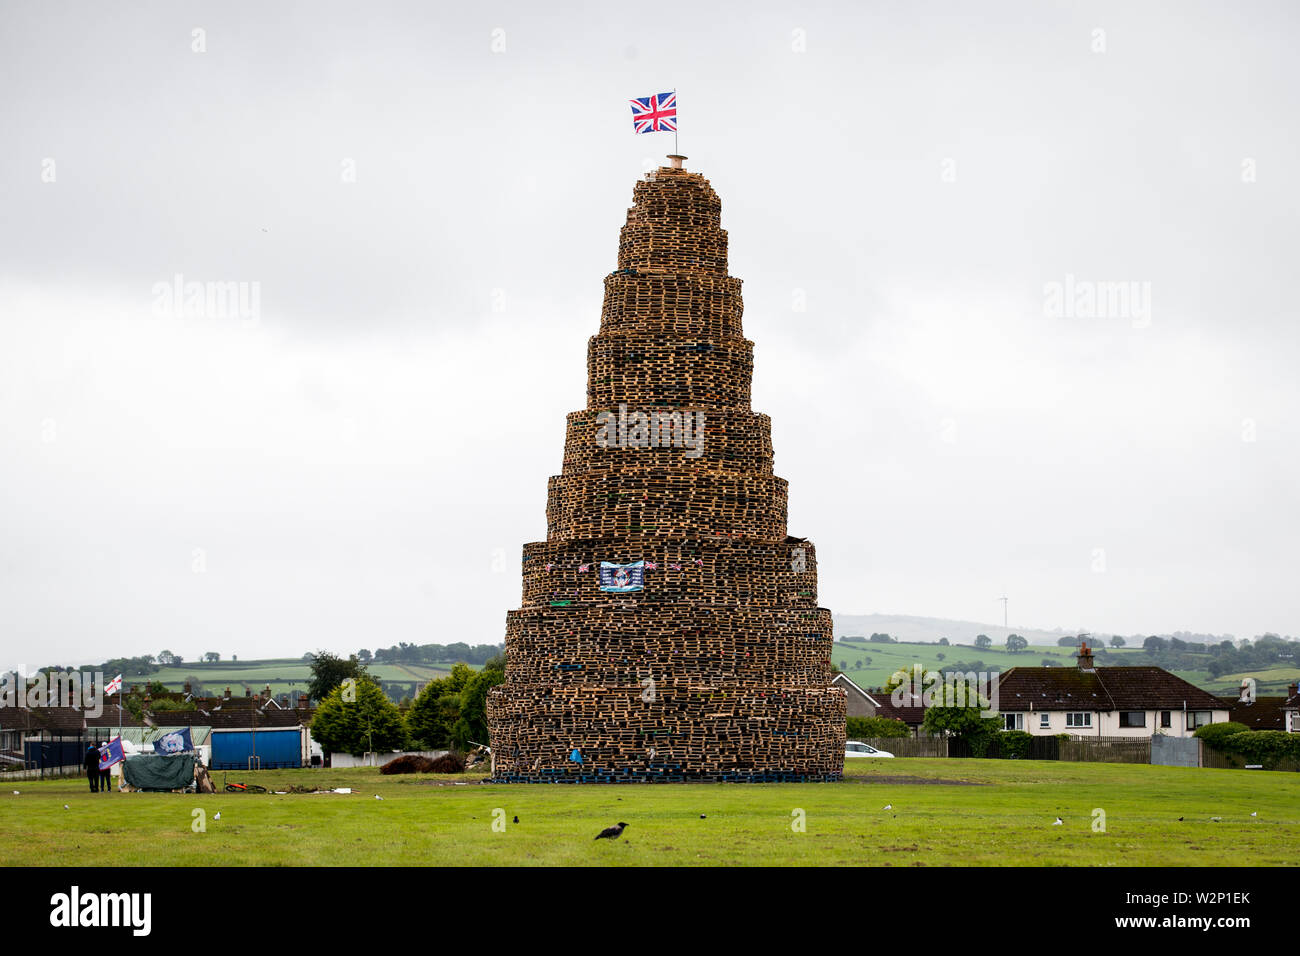 Craigyhill 11th night bonfire in Larne, Northern Ireland. Bonfires are traditionally lit in loyalist communities across Northern Ireland every year on July 11 to mark the anniversary of the Battle of the Boyne. Stock Photo